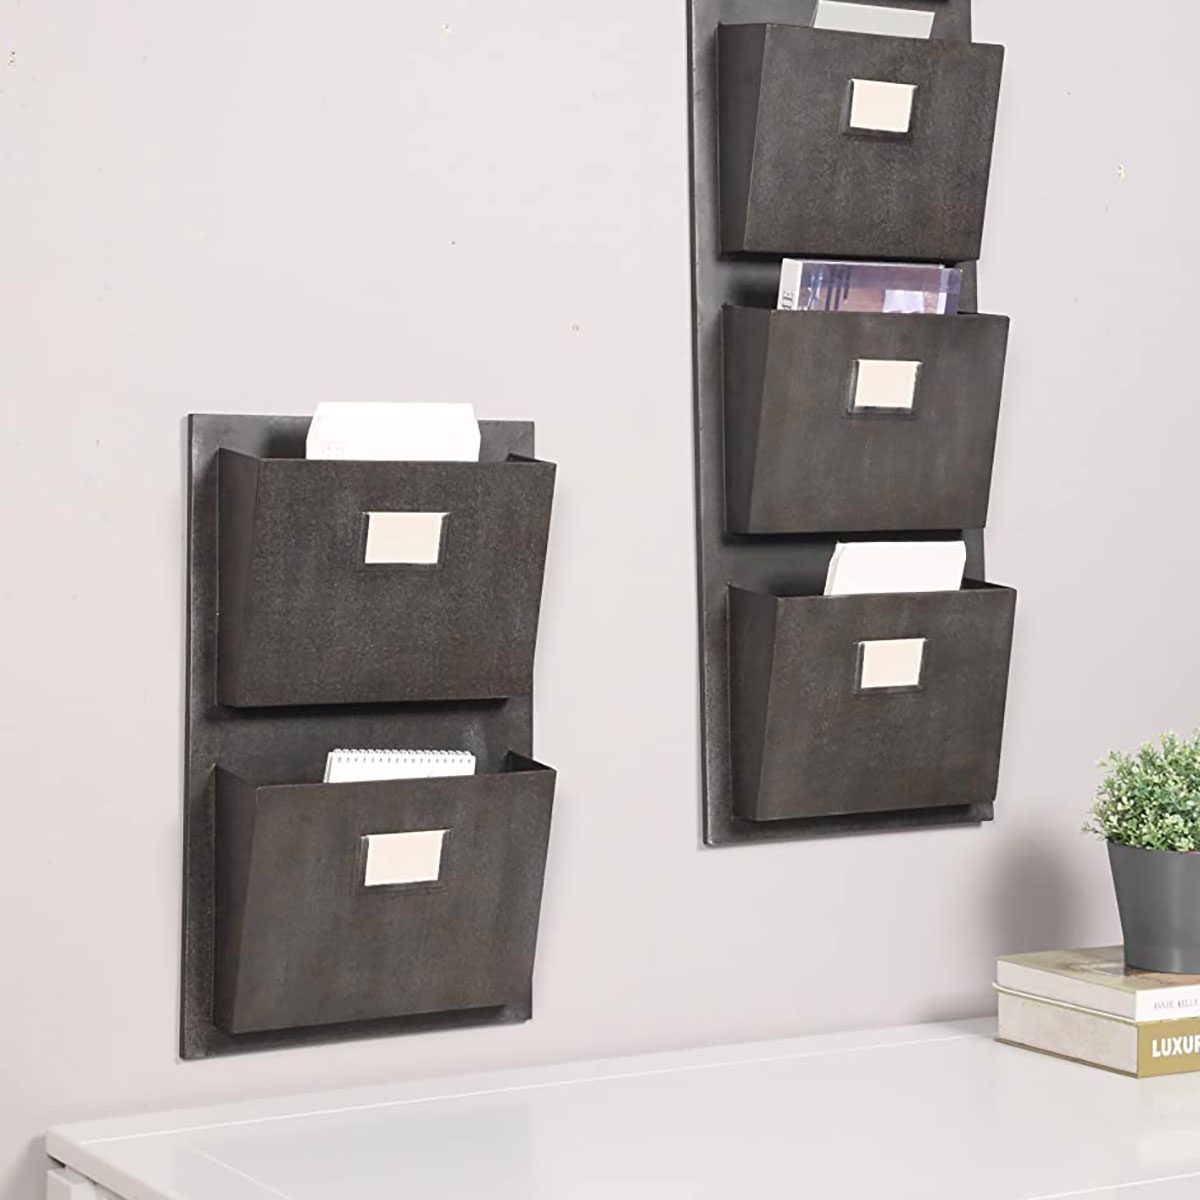 10 Best Home Office Wall Organizers | The Family Handyman